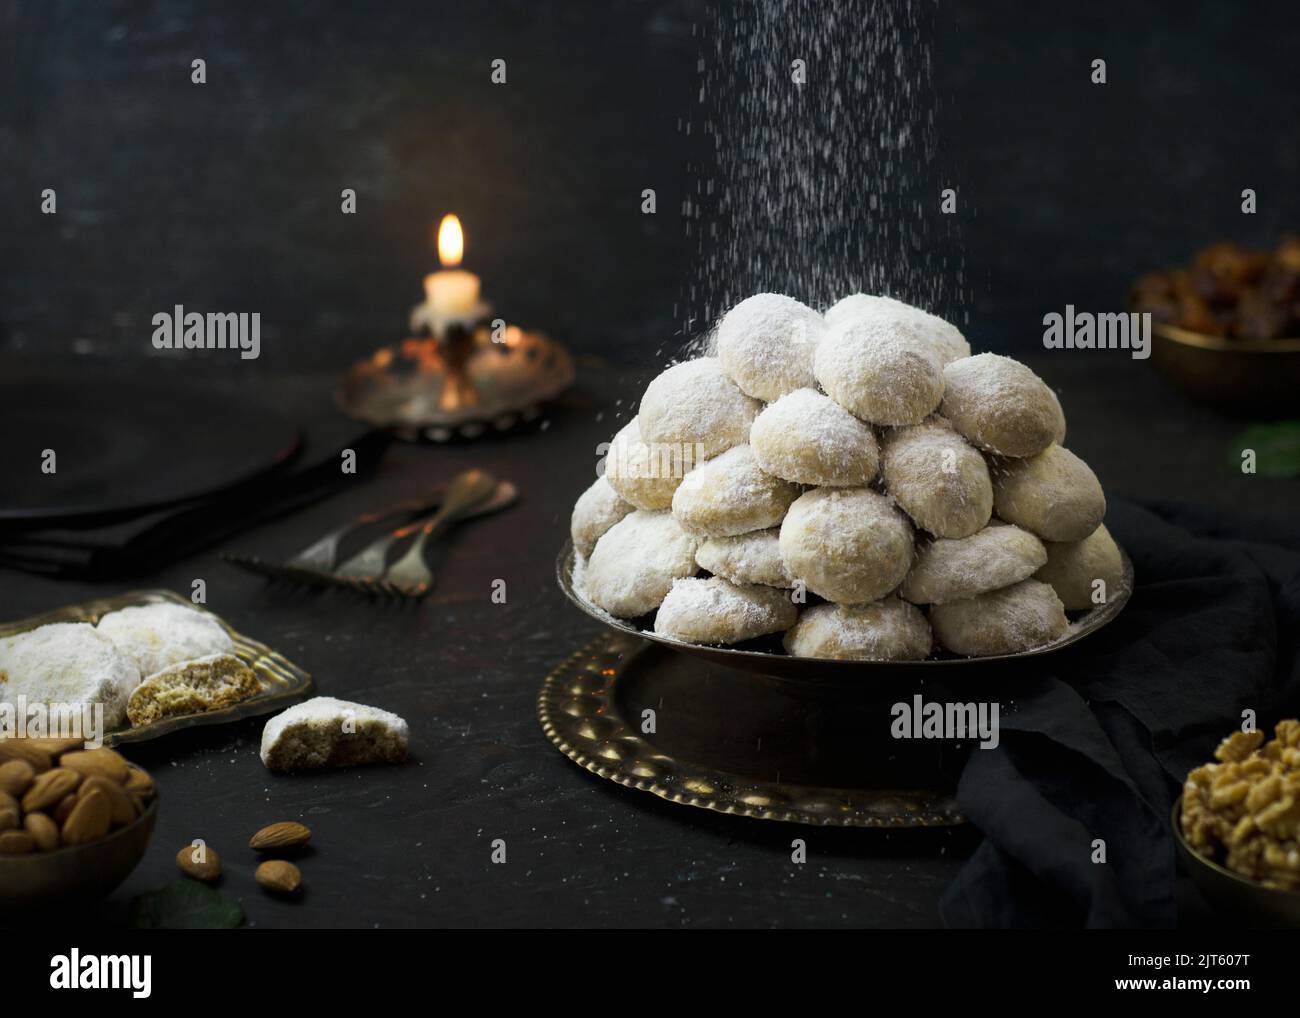 Cookies for celebration of El Fitr Islamic Feast( The Feast that comes after Ramadan).Sprinkling powdered sugar on Kahk (Eid-Al- Fitr cookies). Stock Photo